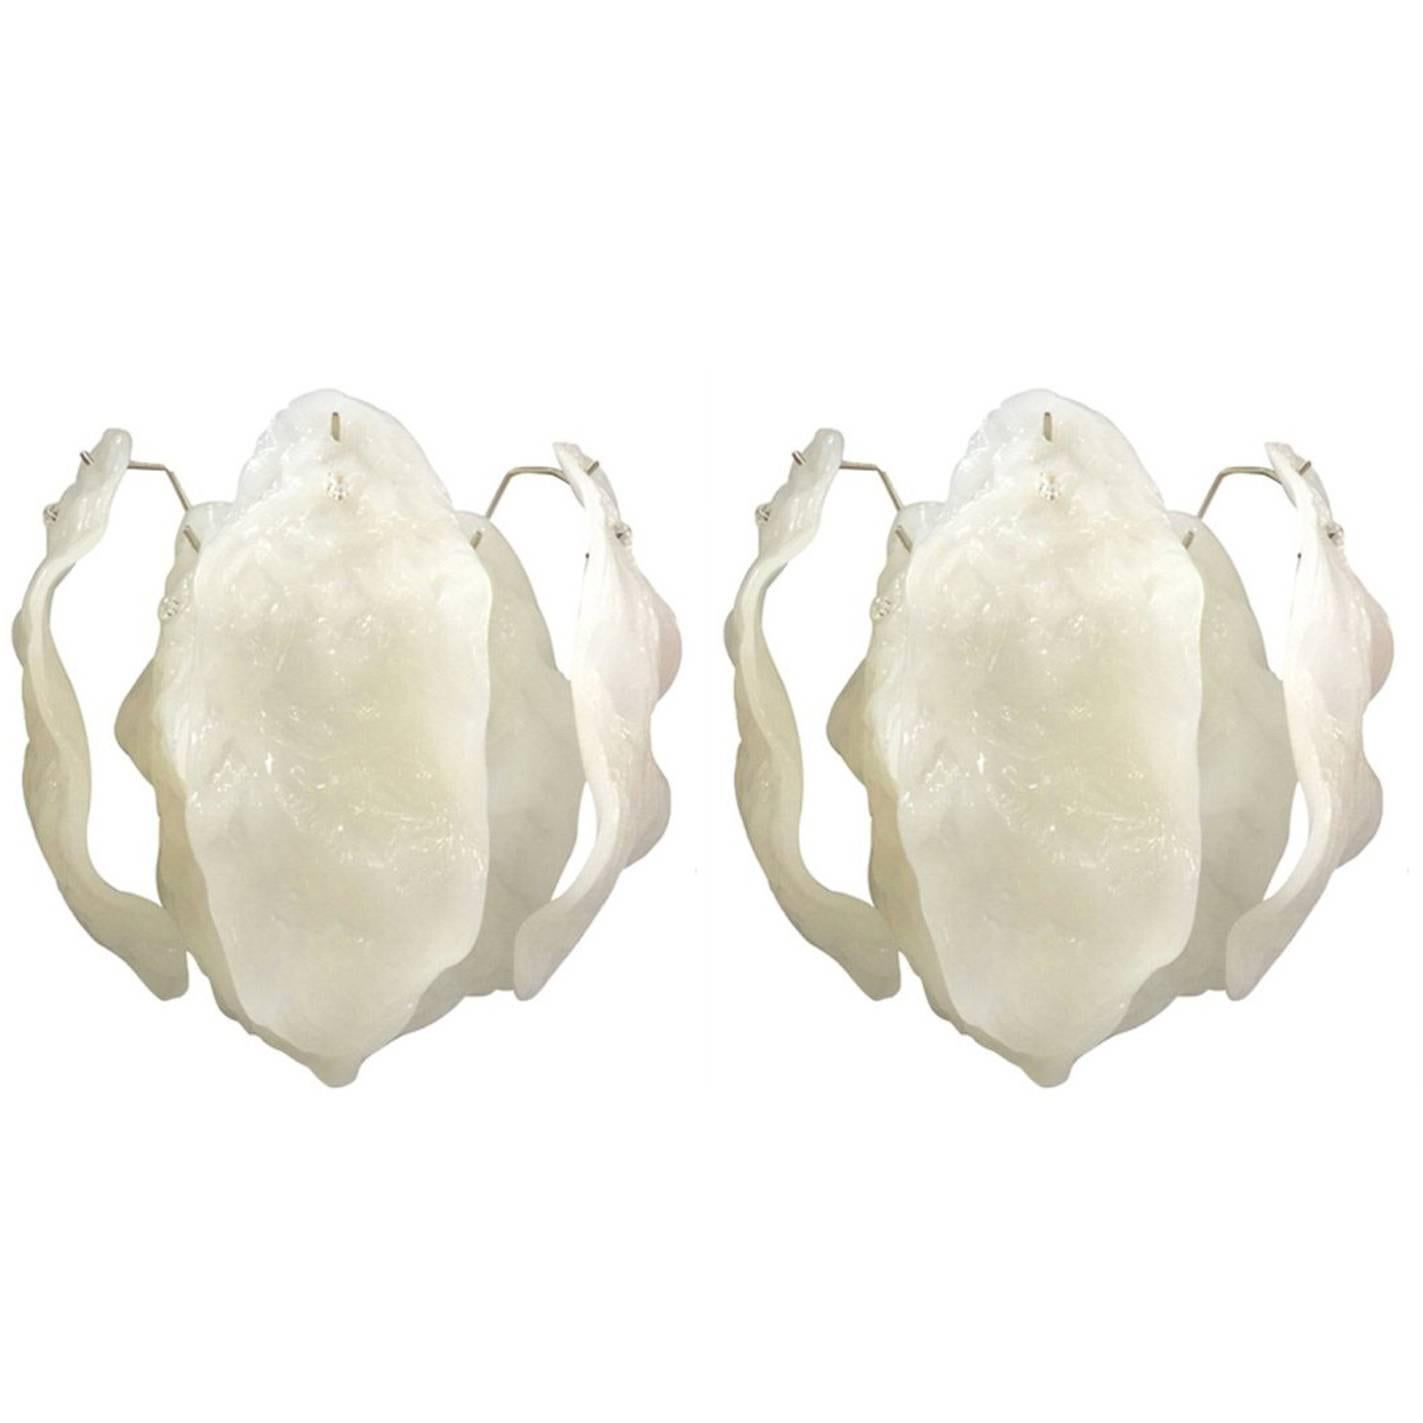 Pair of Murano Milky Bent Leaves Sconces